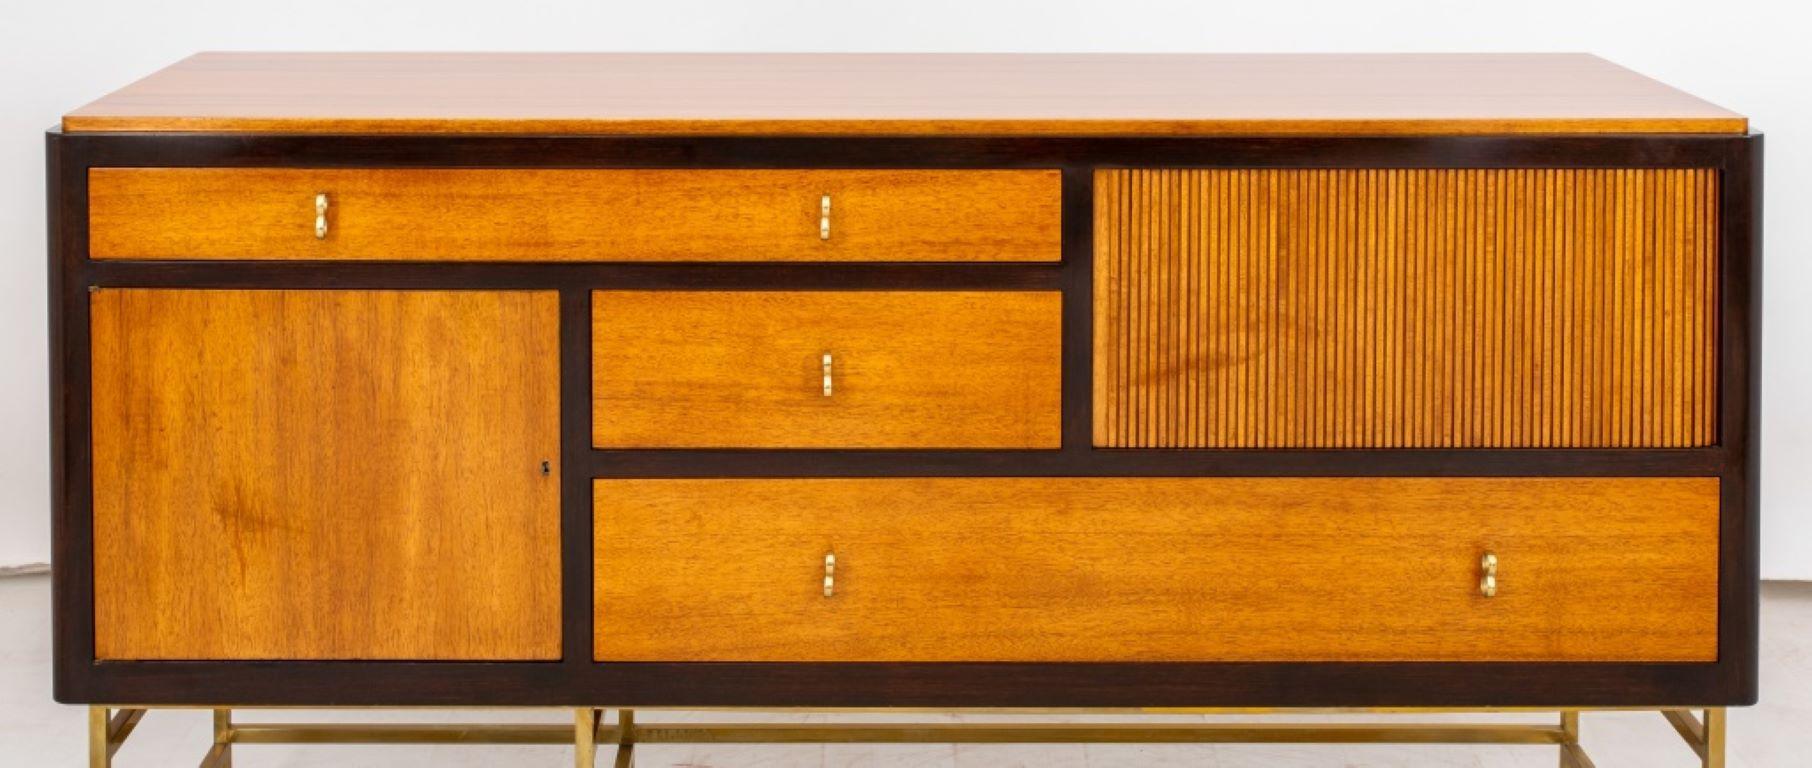 Edward Wormley for Dunbar Model 5465 Mahogany Sideboard, designed 1957, three drawers, tambour door, and one door opening to compartment with shelf, with bronze base, 